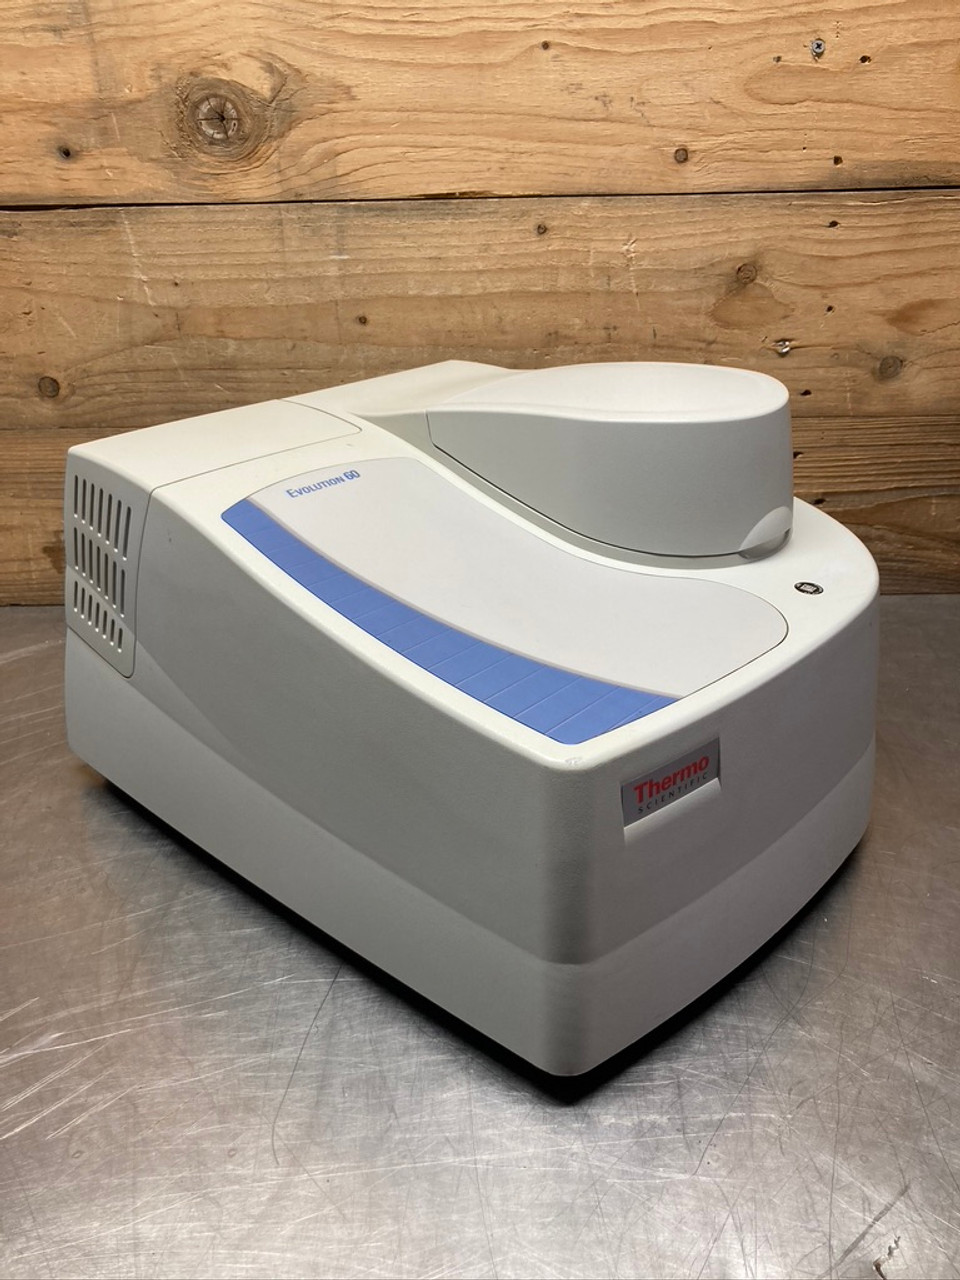 Thermo Fisher Scientific Evolution 60 UV-Visible Spectrophotometer